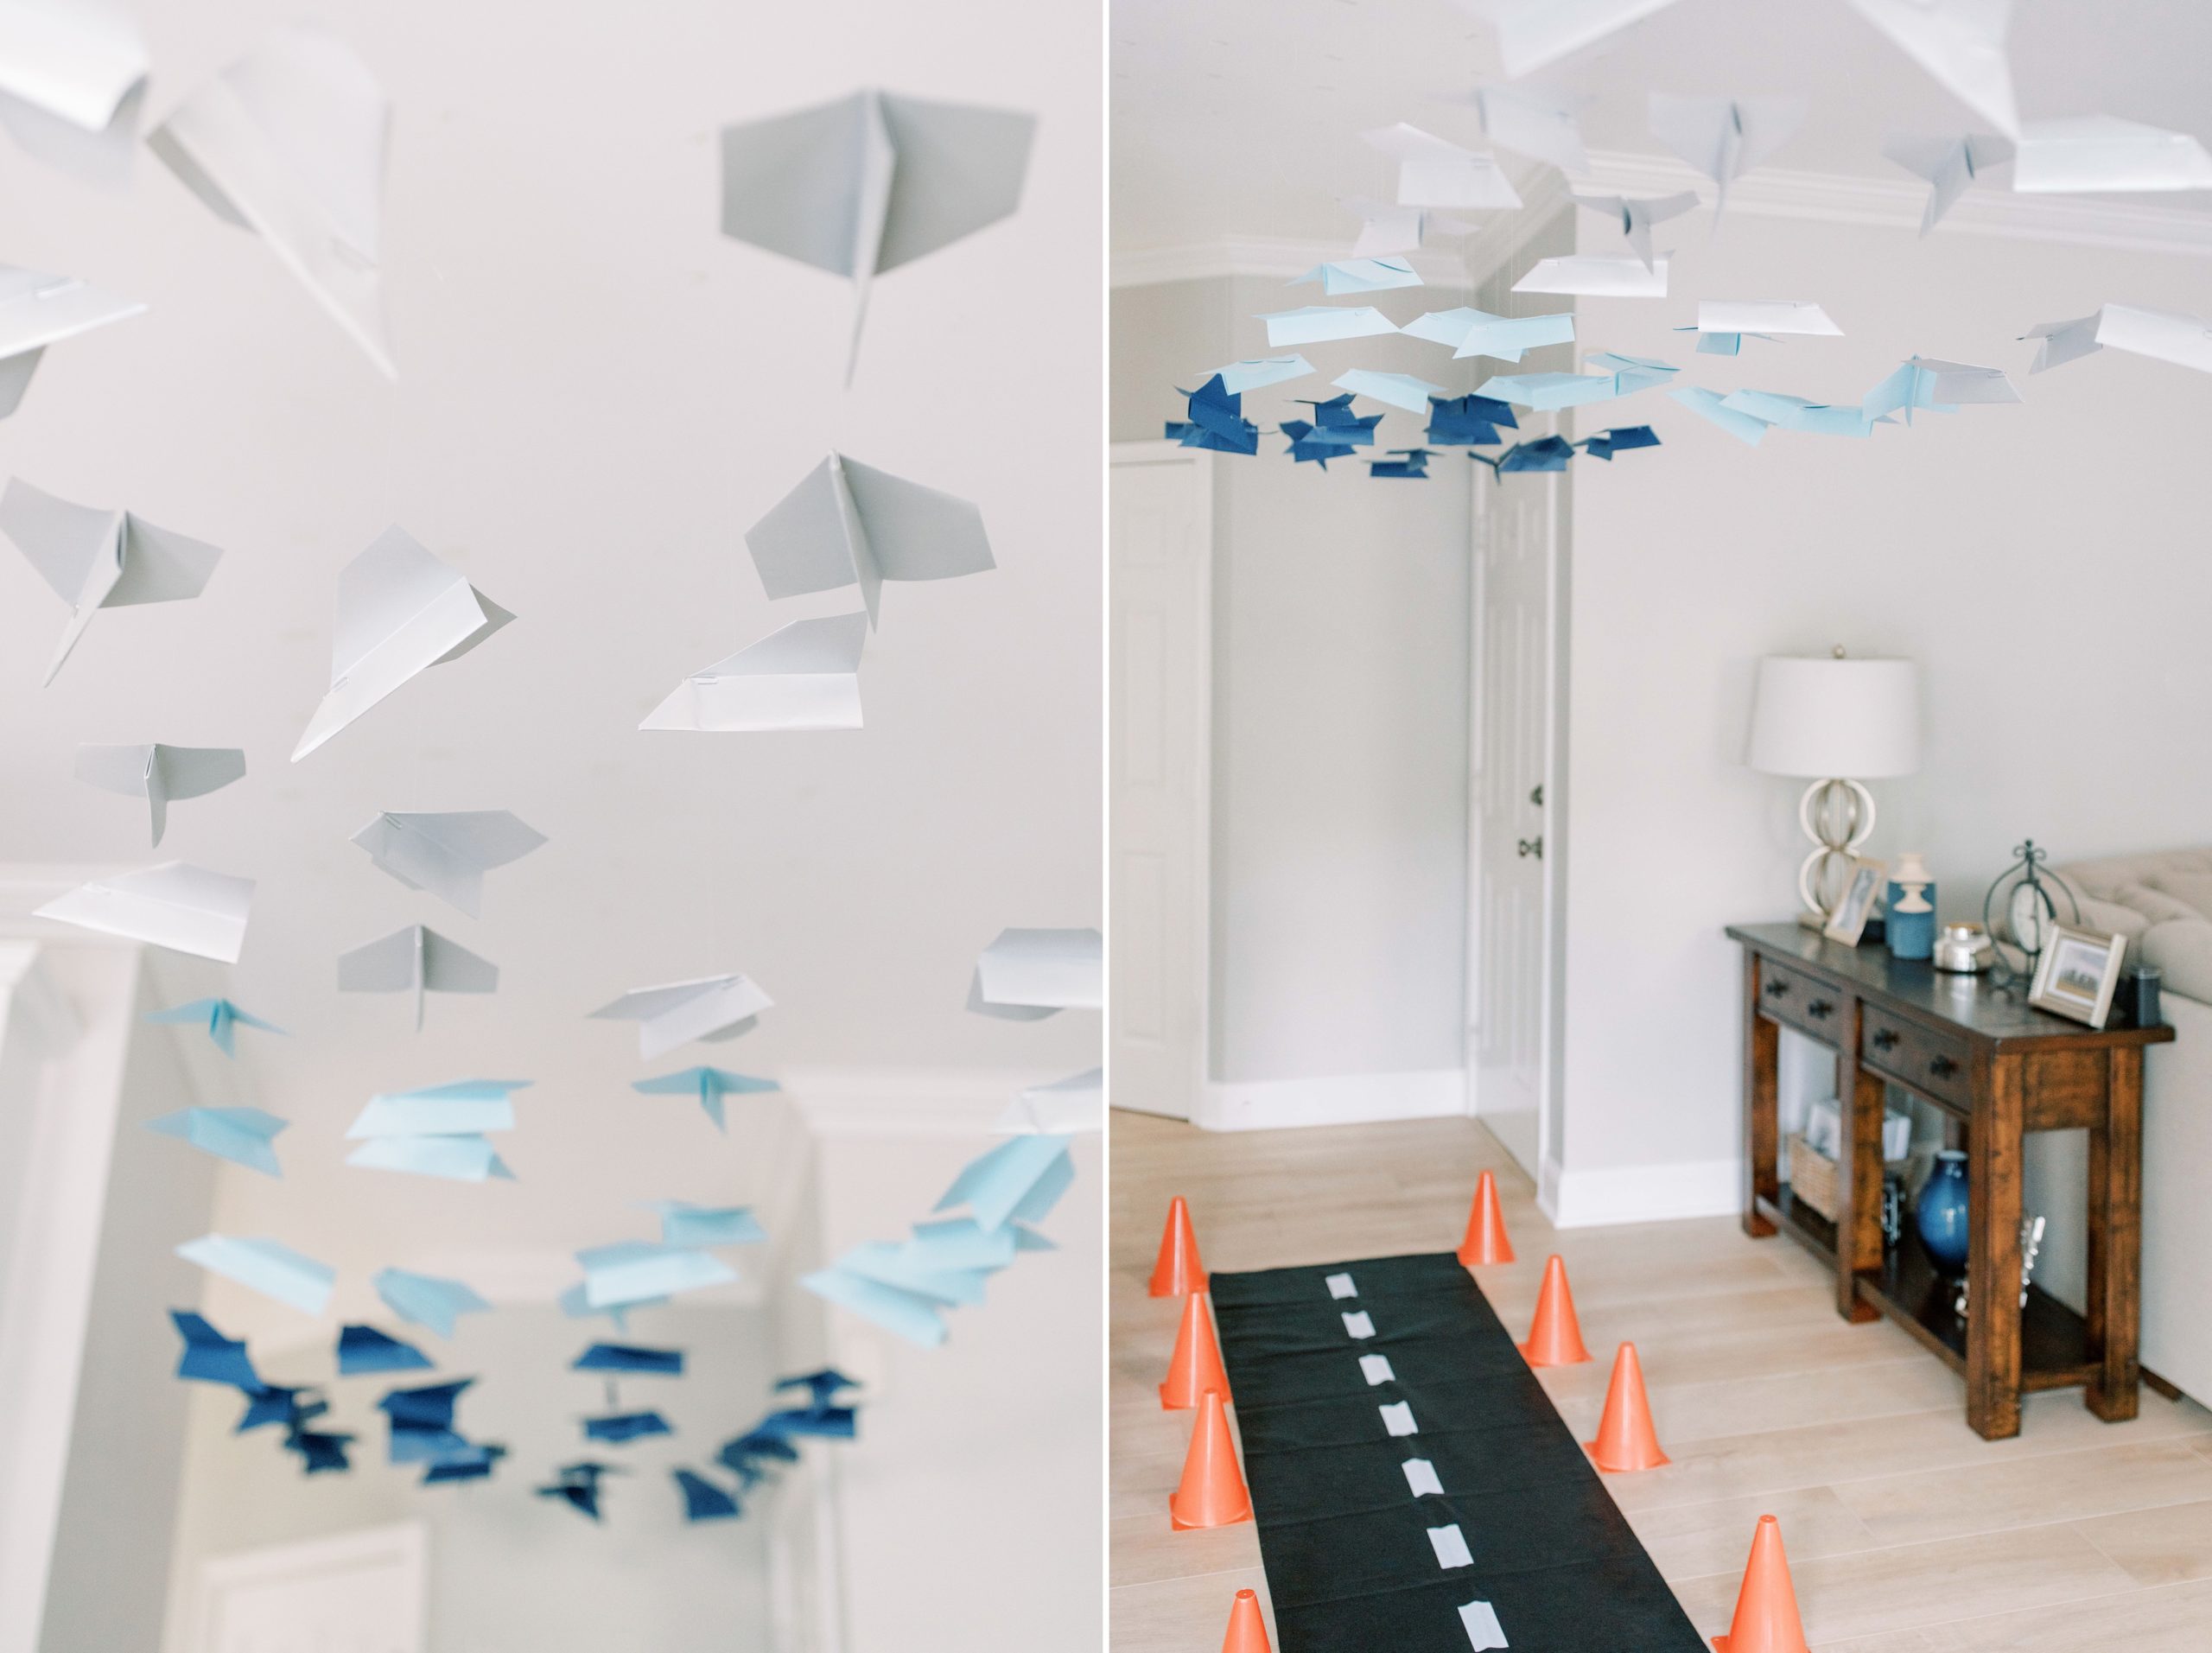 Hanging Paper Airplanes for Around the World Party